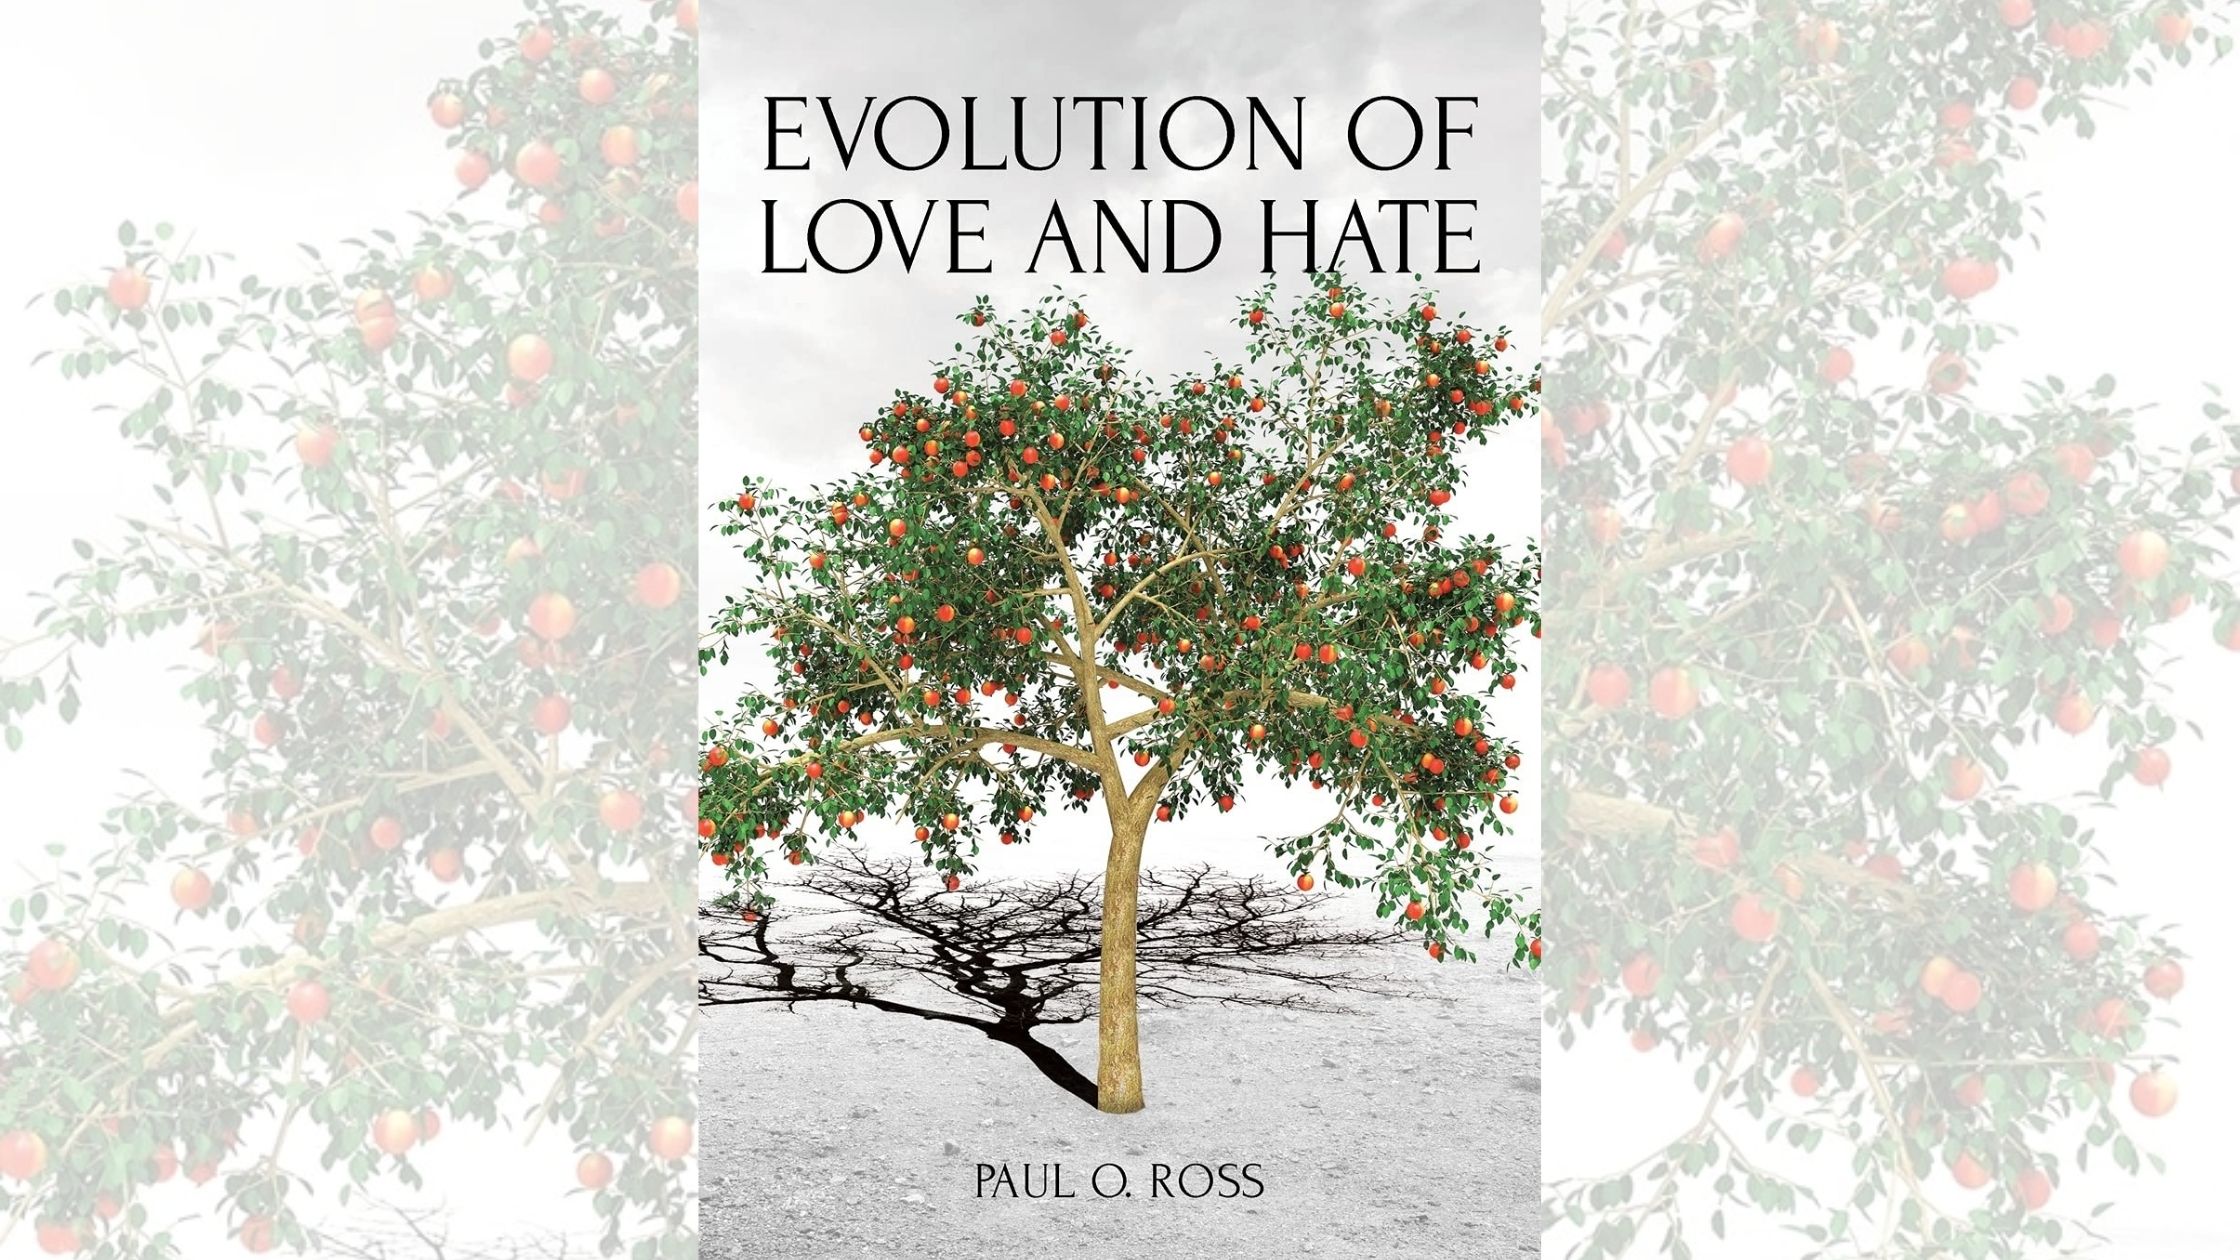 Paul O. Ross’s newly released “Evolution of Love and Hate” is a creative and thought-provoking opportunity for personal growth